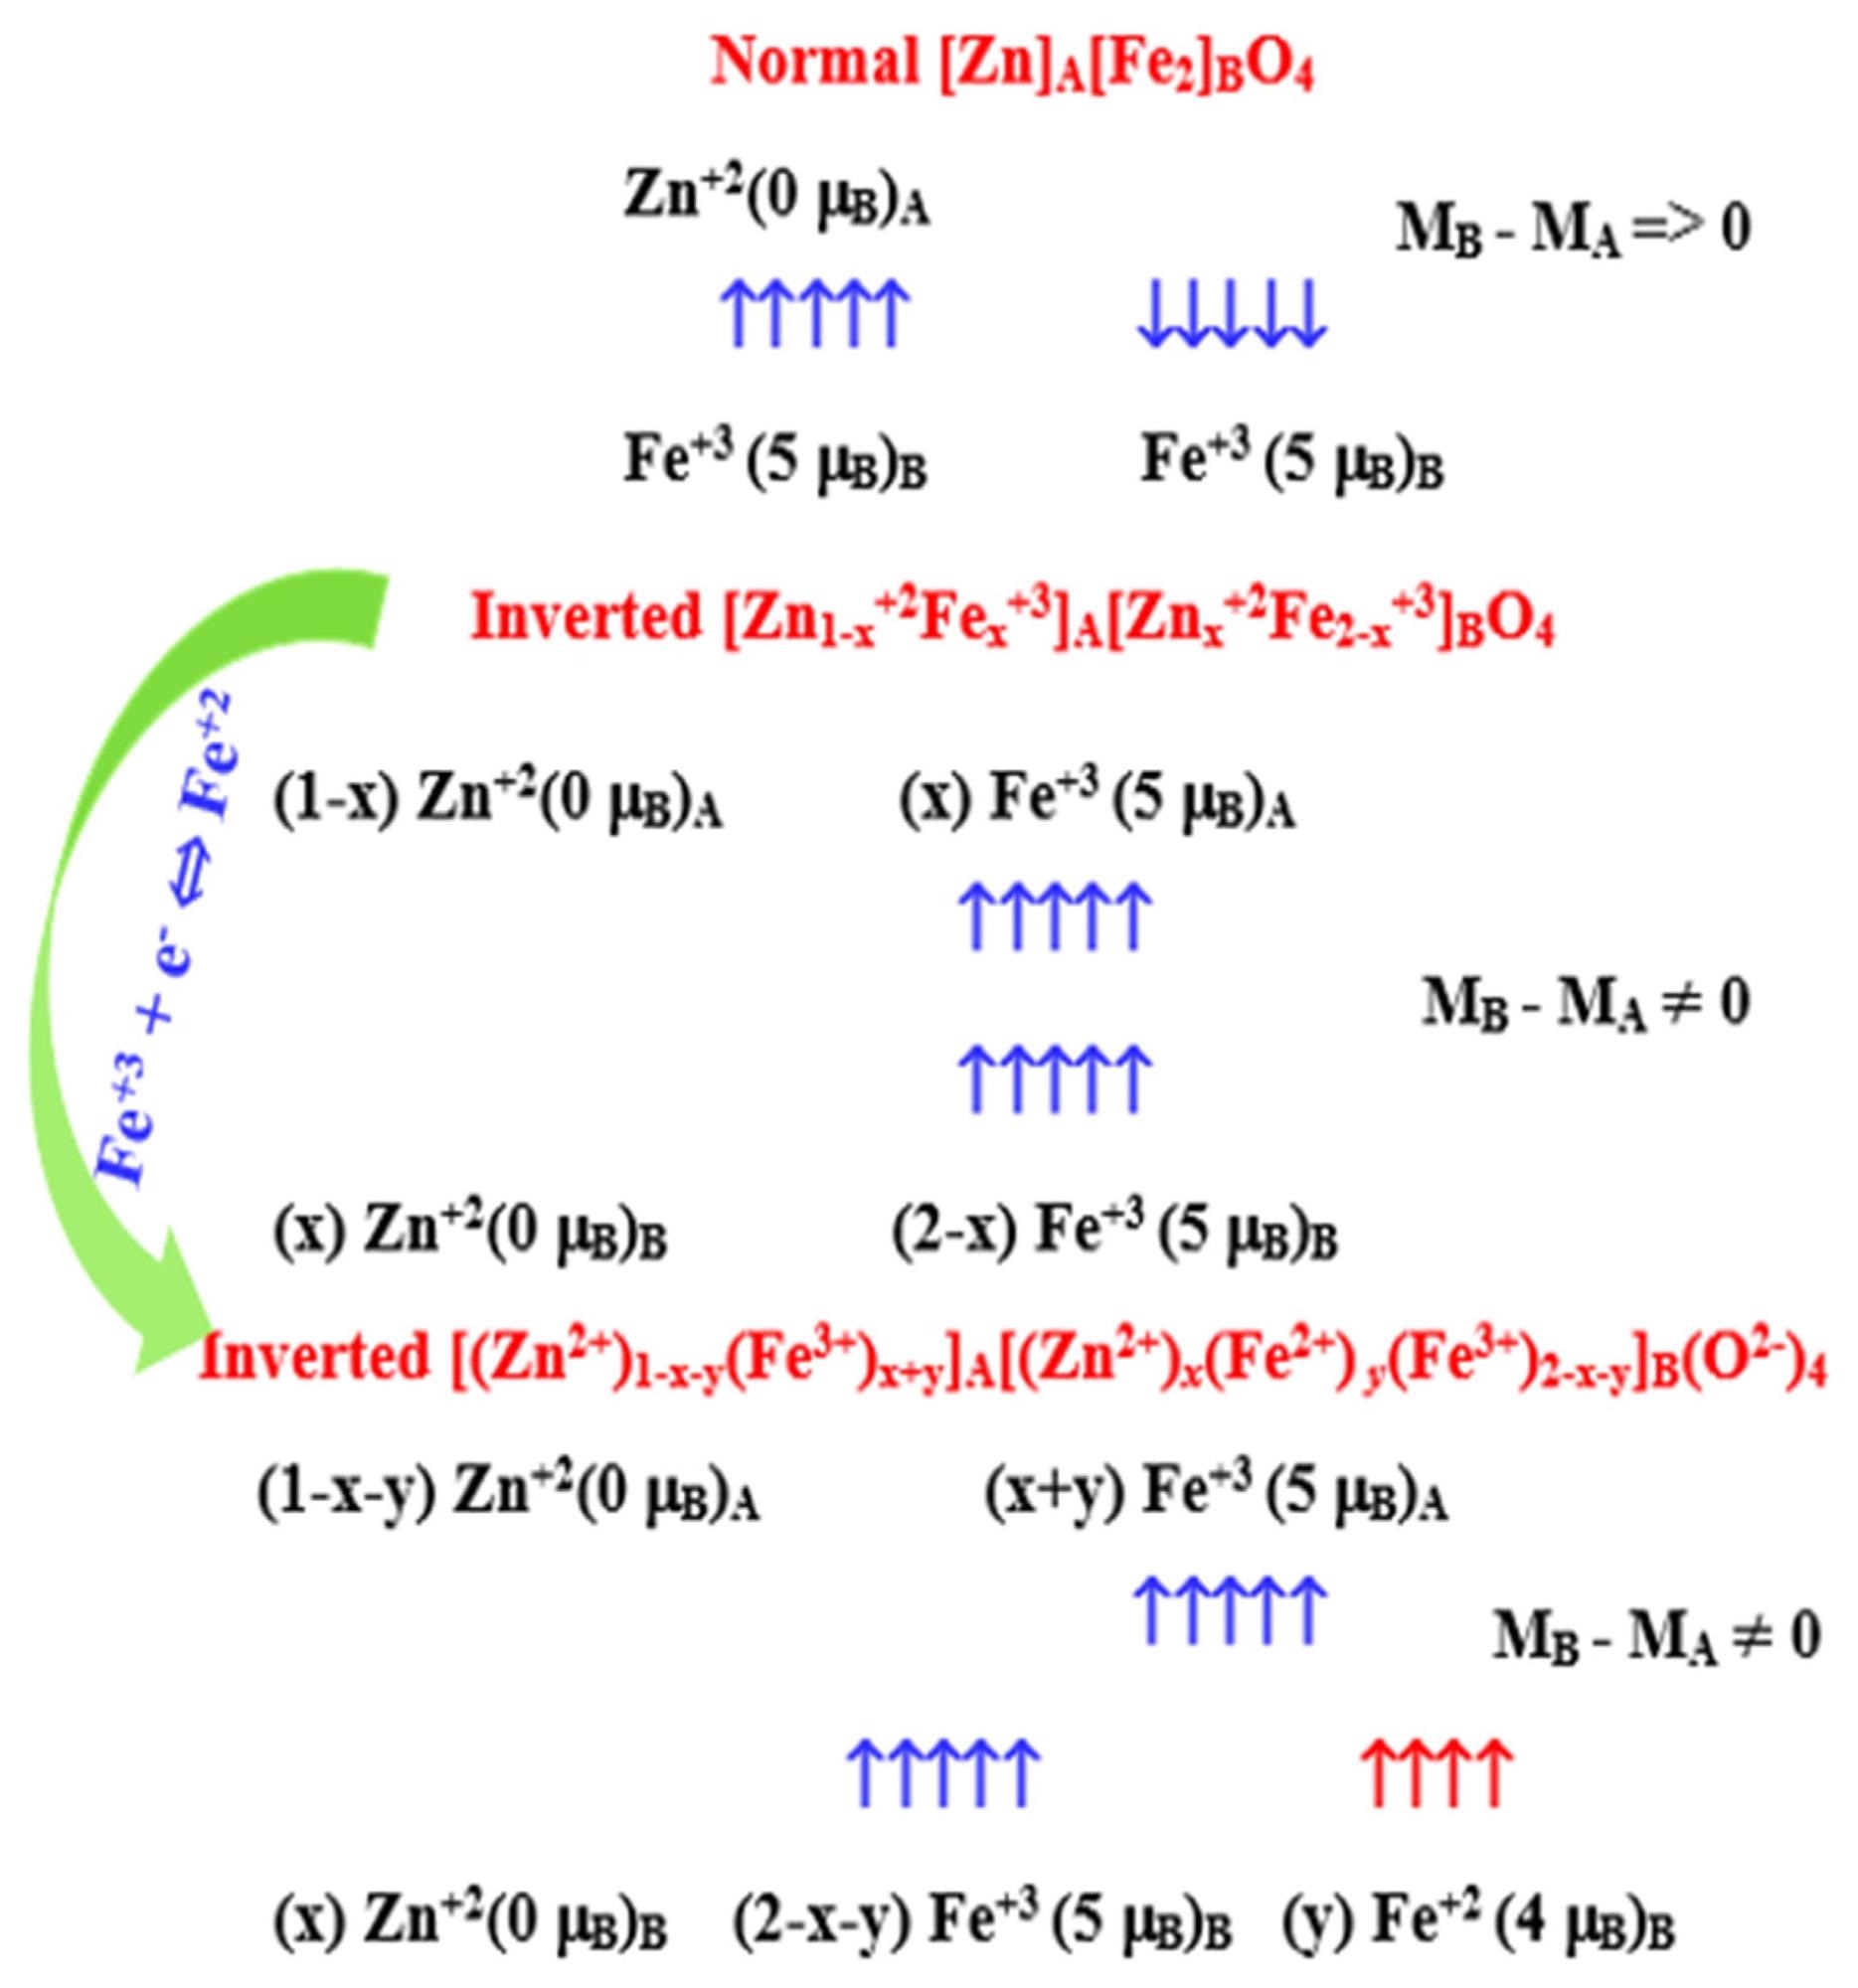 Various spin arrangement schemes in ZnFe2O4.